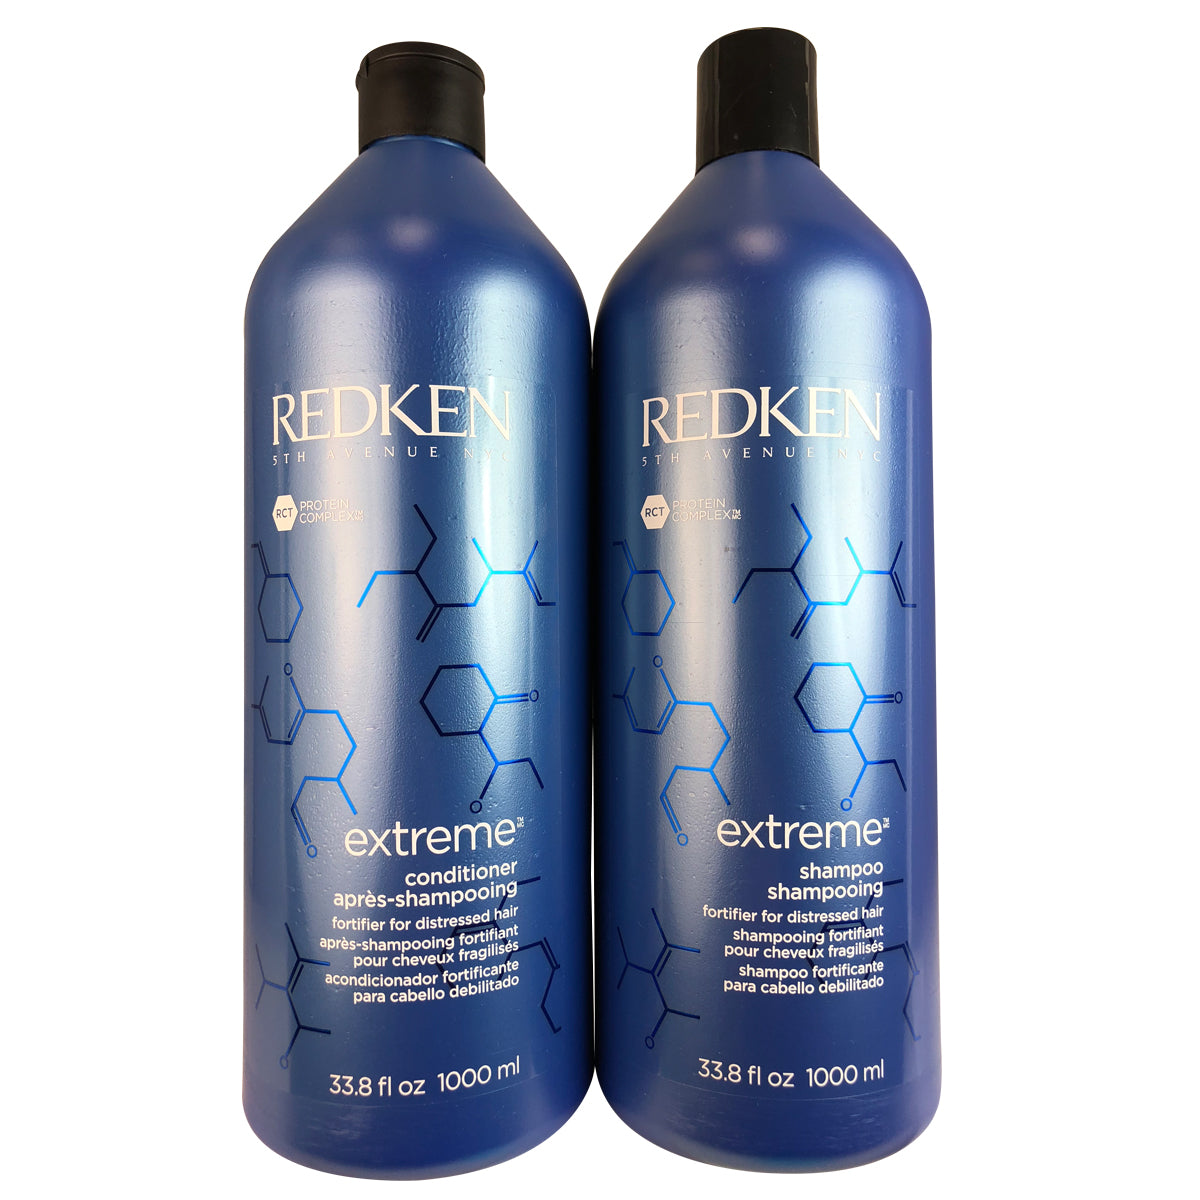 Redken Extreme Shampoo 10.1 oz & Conditioner 8.5 oz  Fortifies Distressed Hair